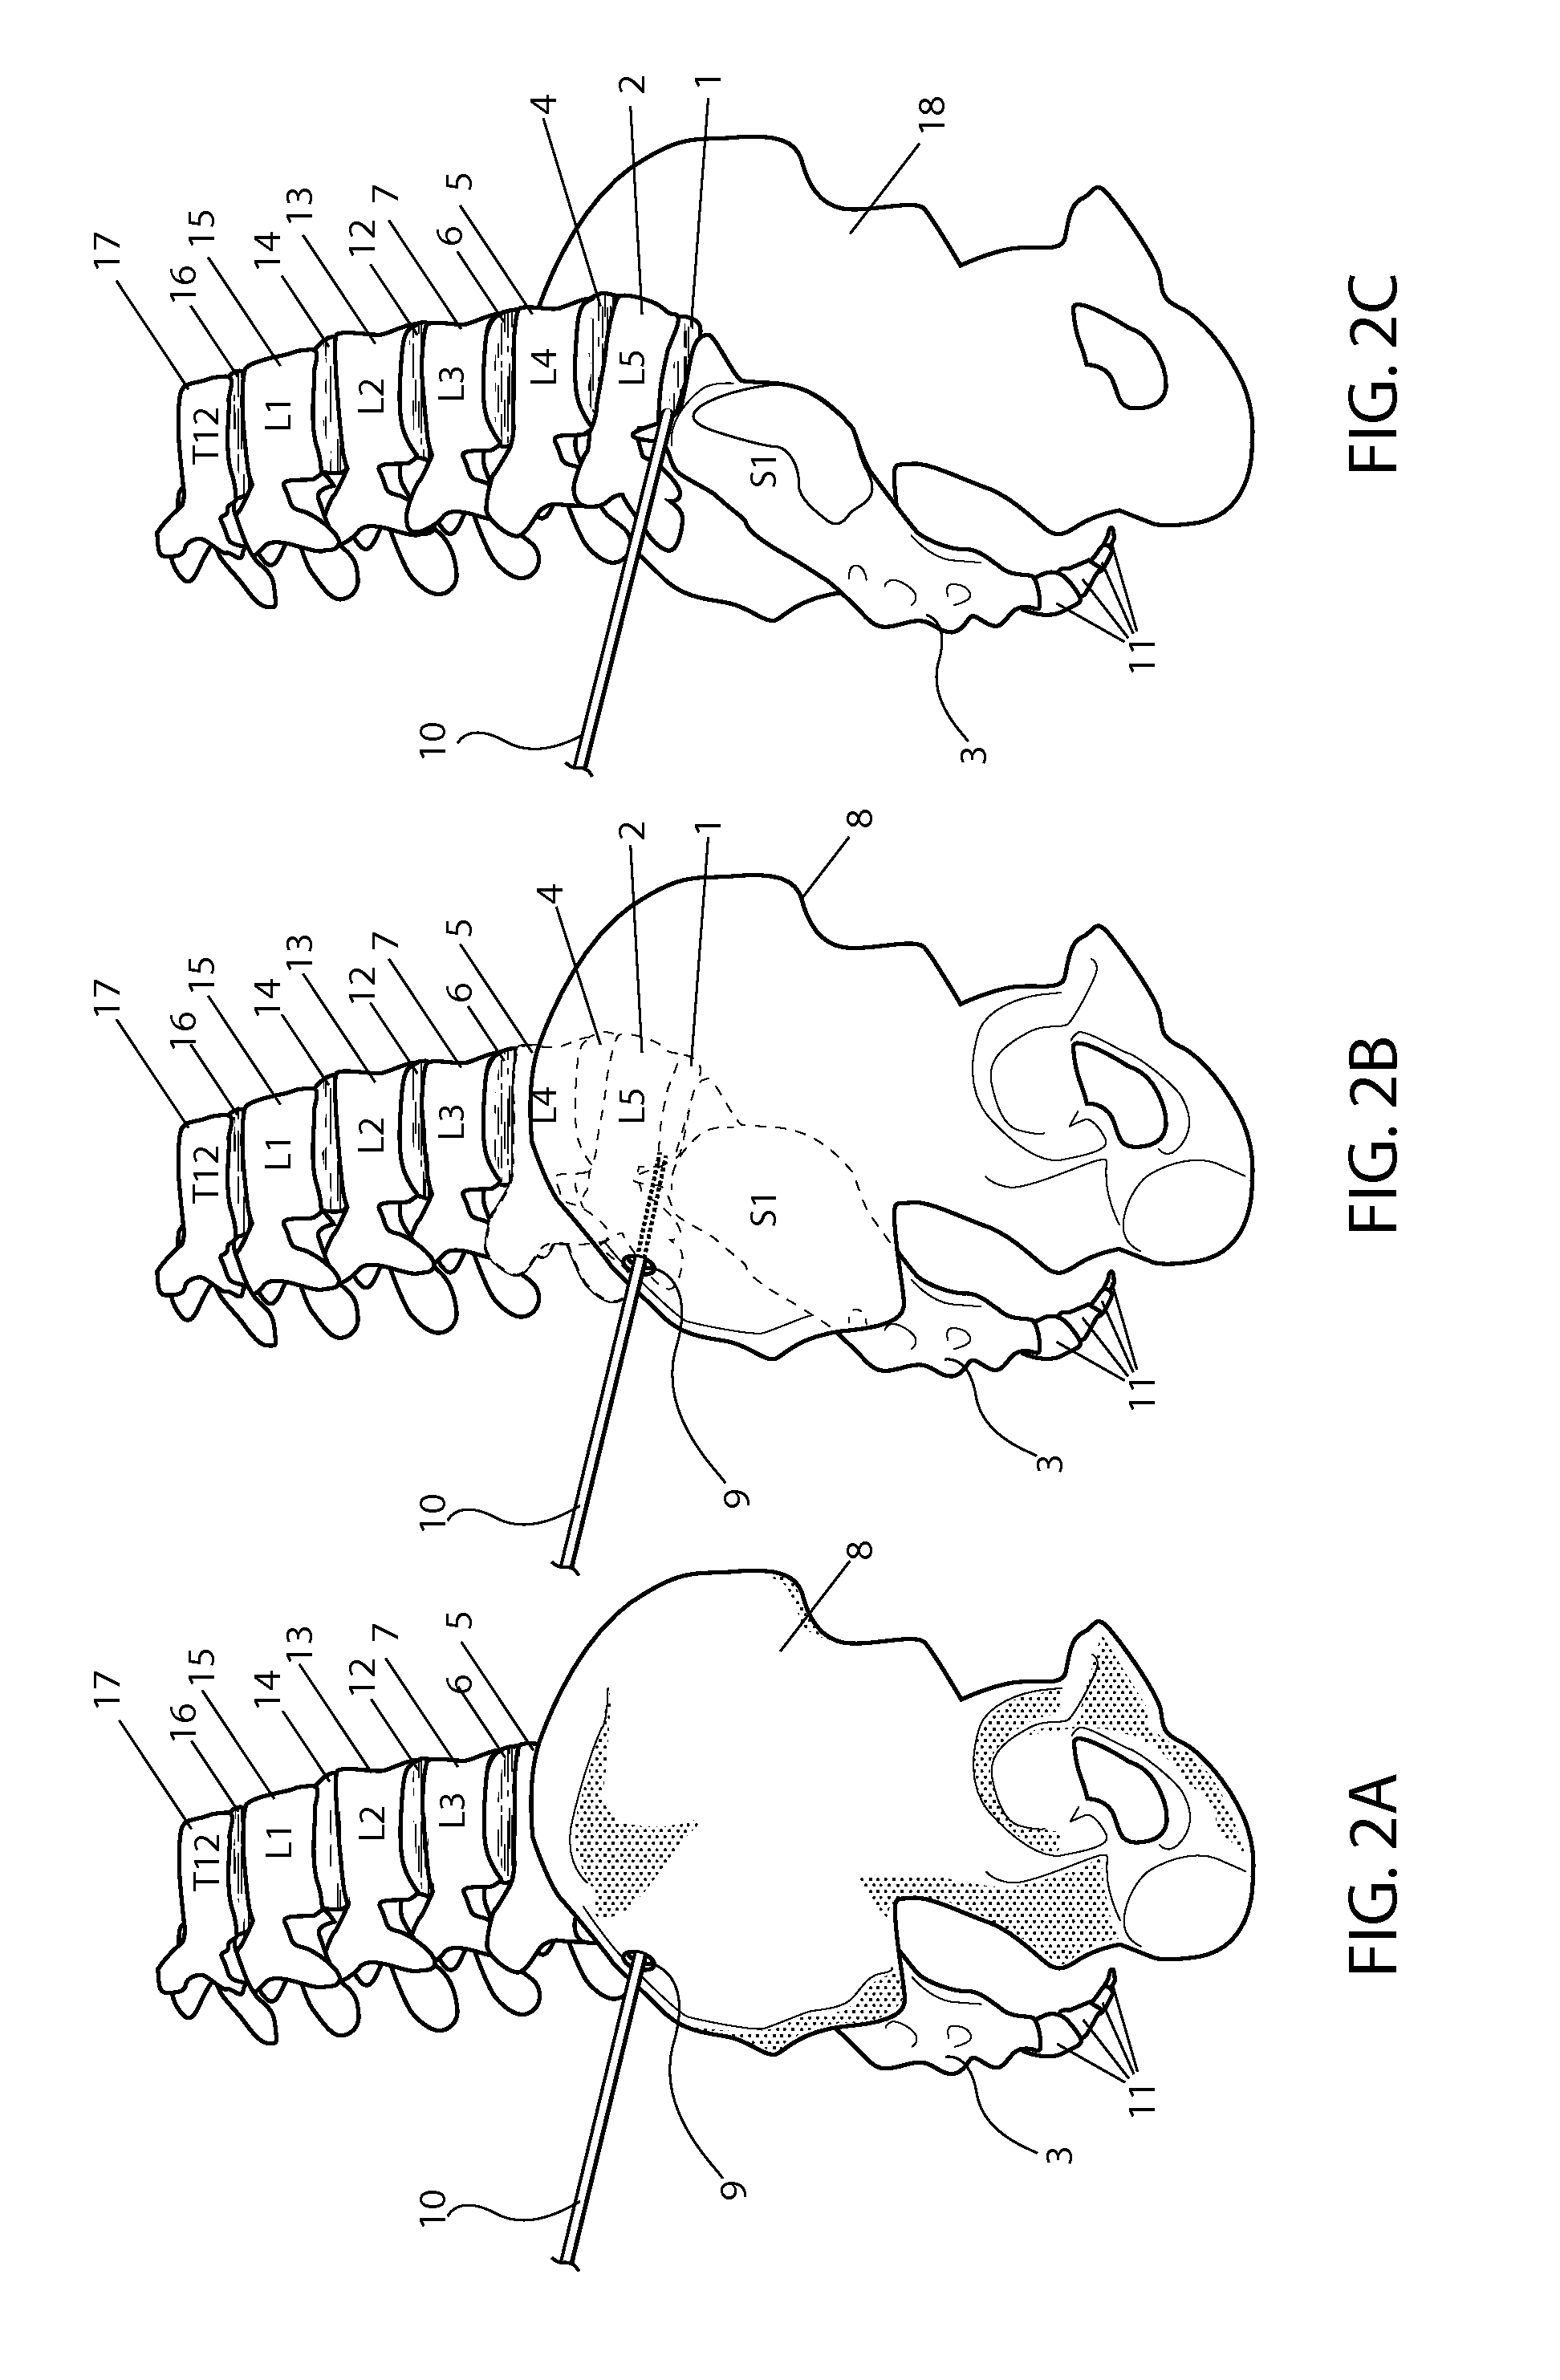 Trans-osseous oblique lumbosacral fusion system and method